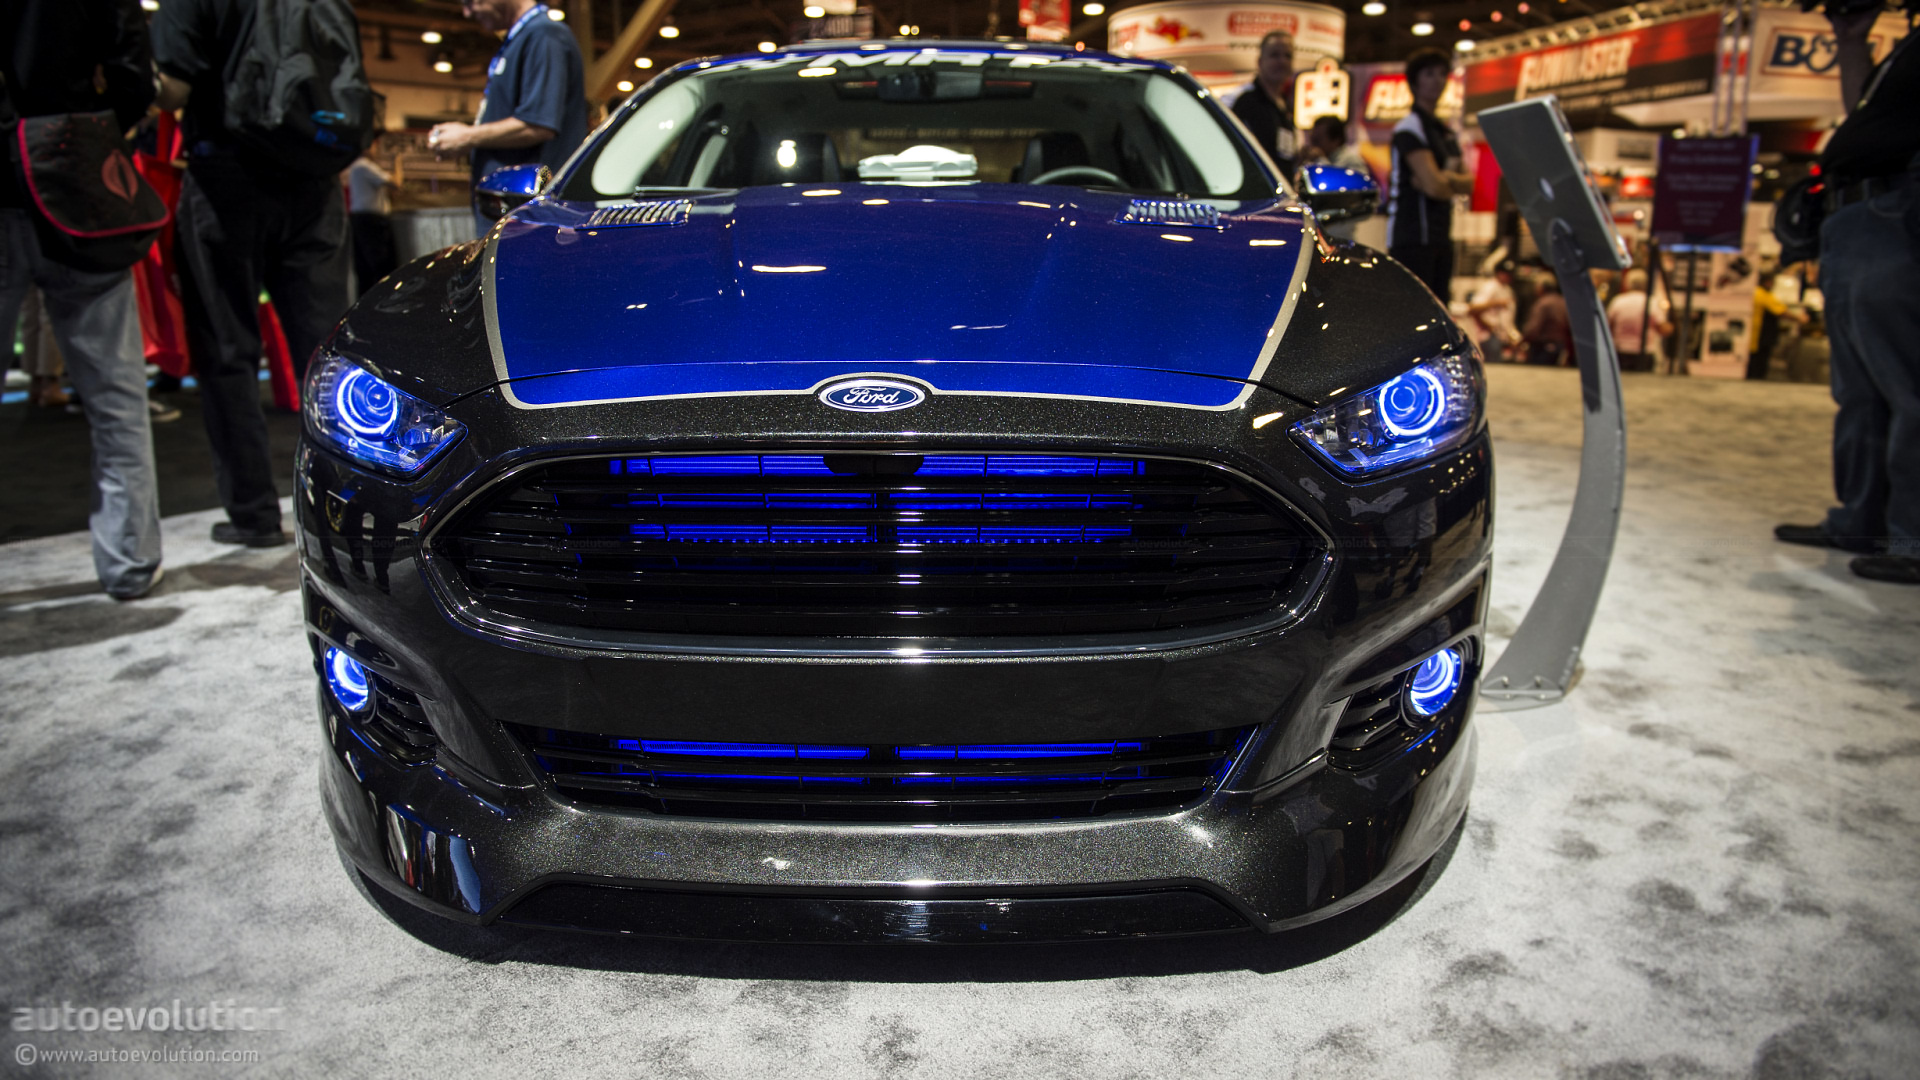 2012 SEMA: Ford Fusion by MRT Performance - Live Photos